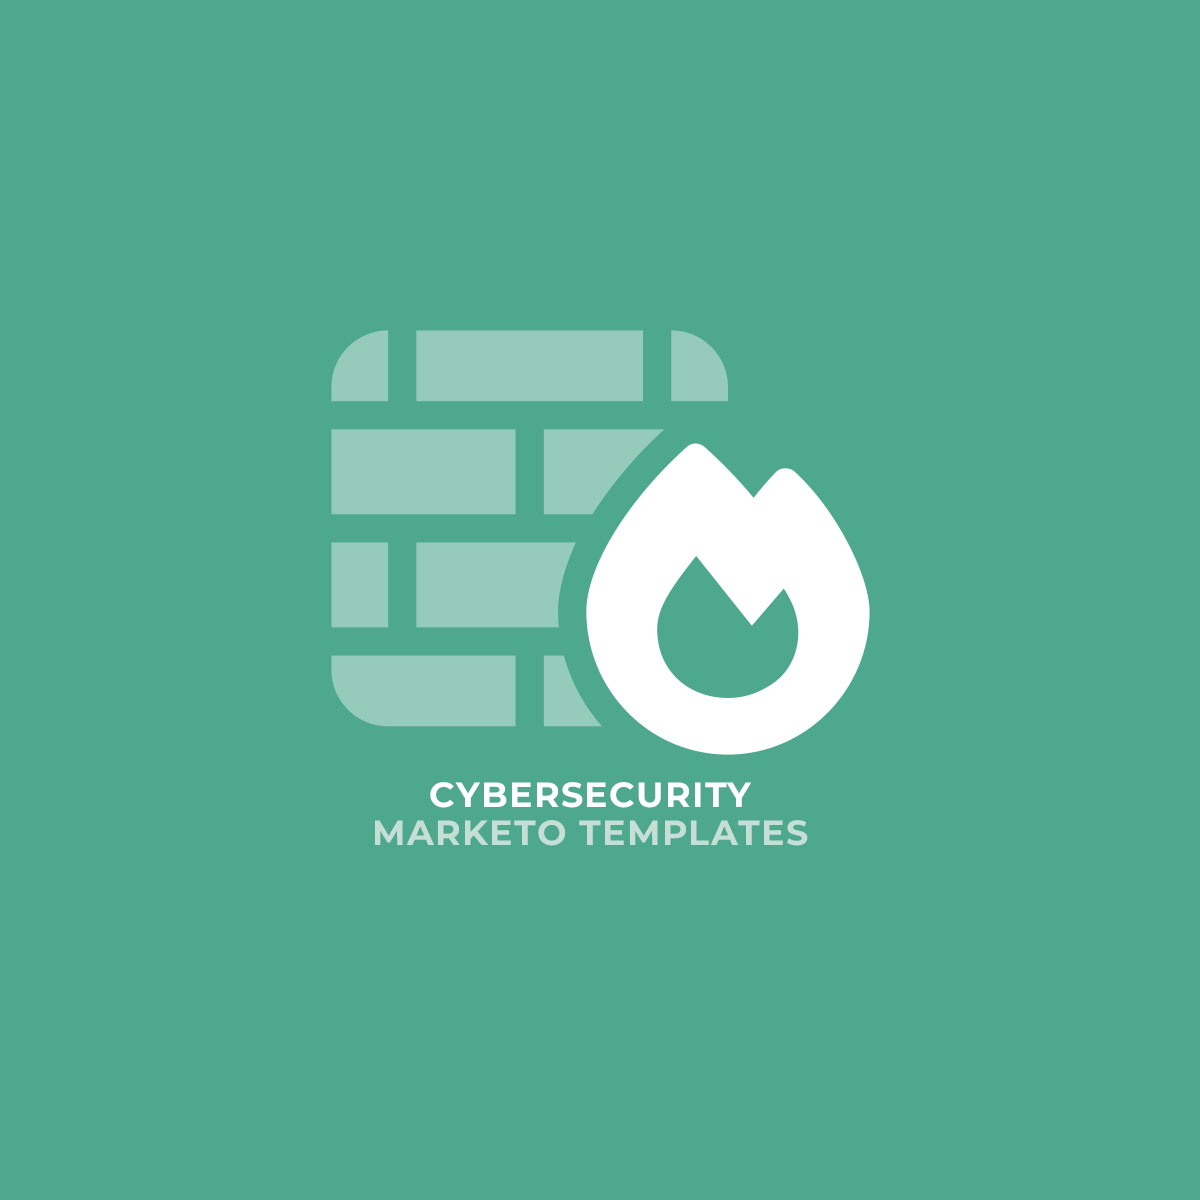 Cyber Security flat icon